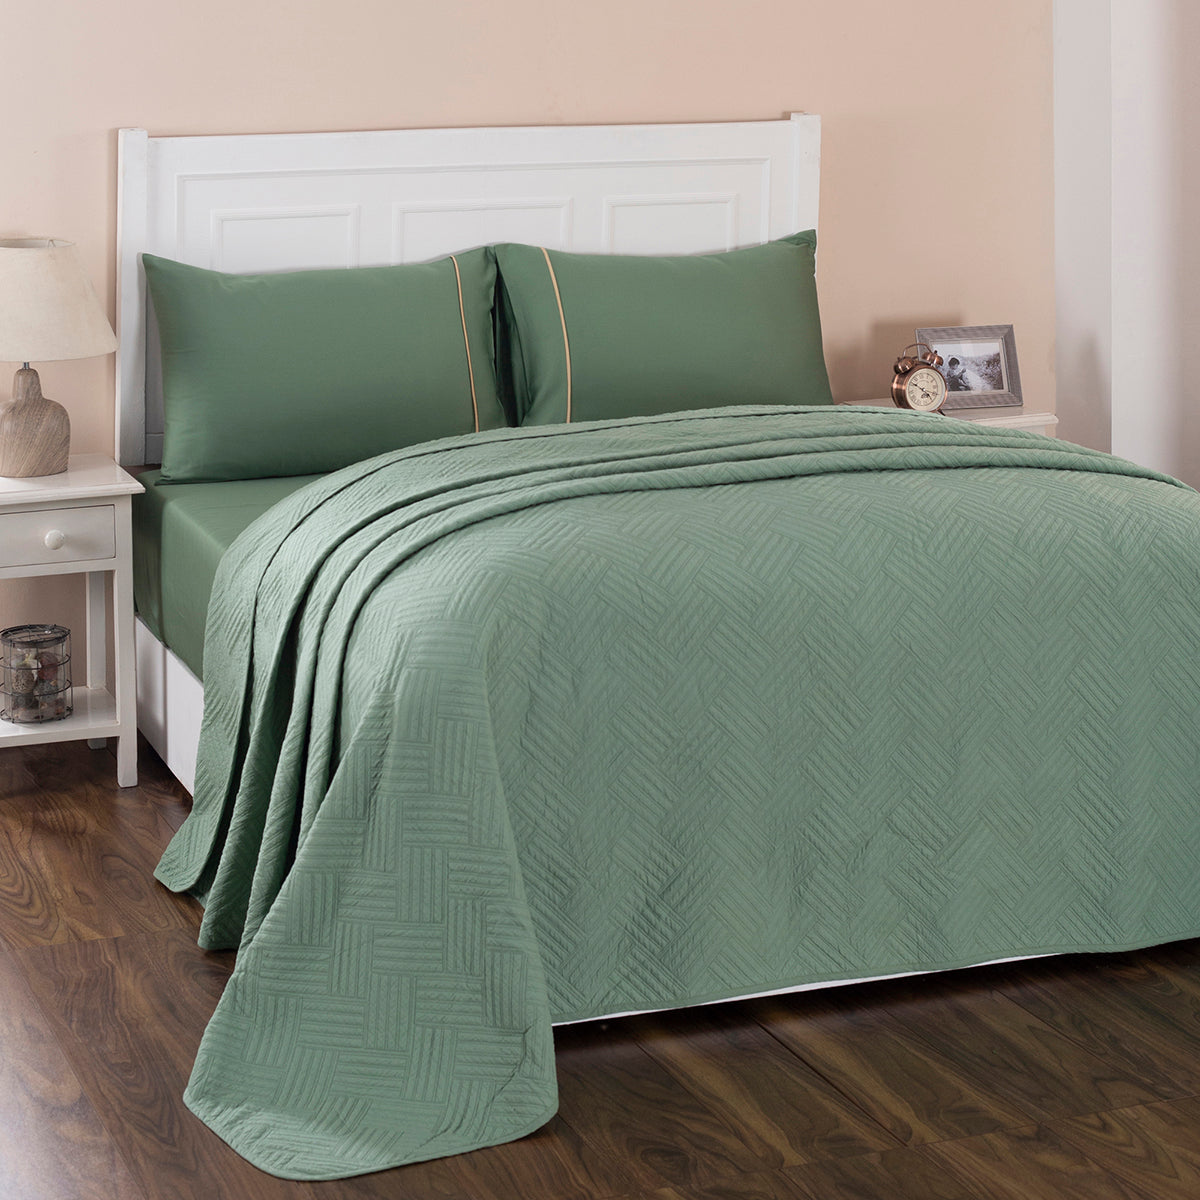 Eliott Summer AC Quilt/Quilted Bed Cover/Comforter Basil